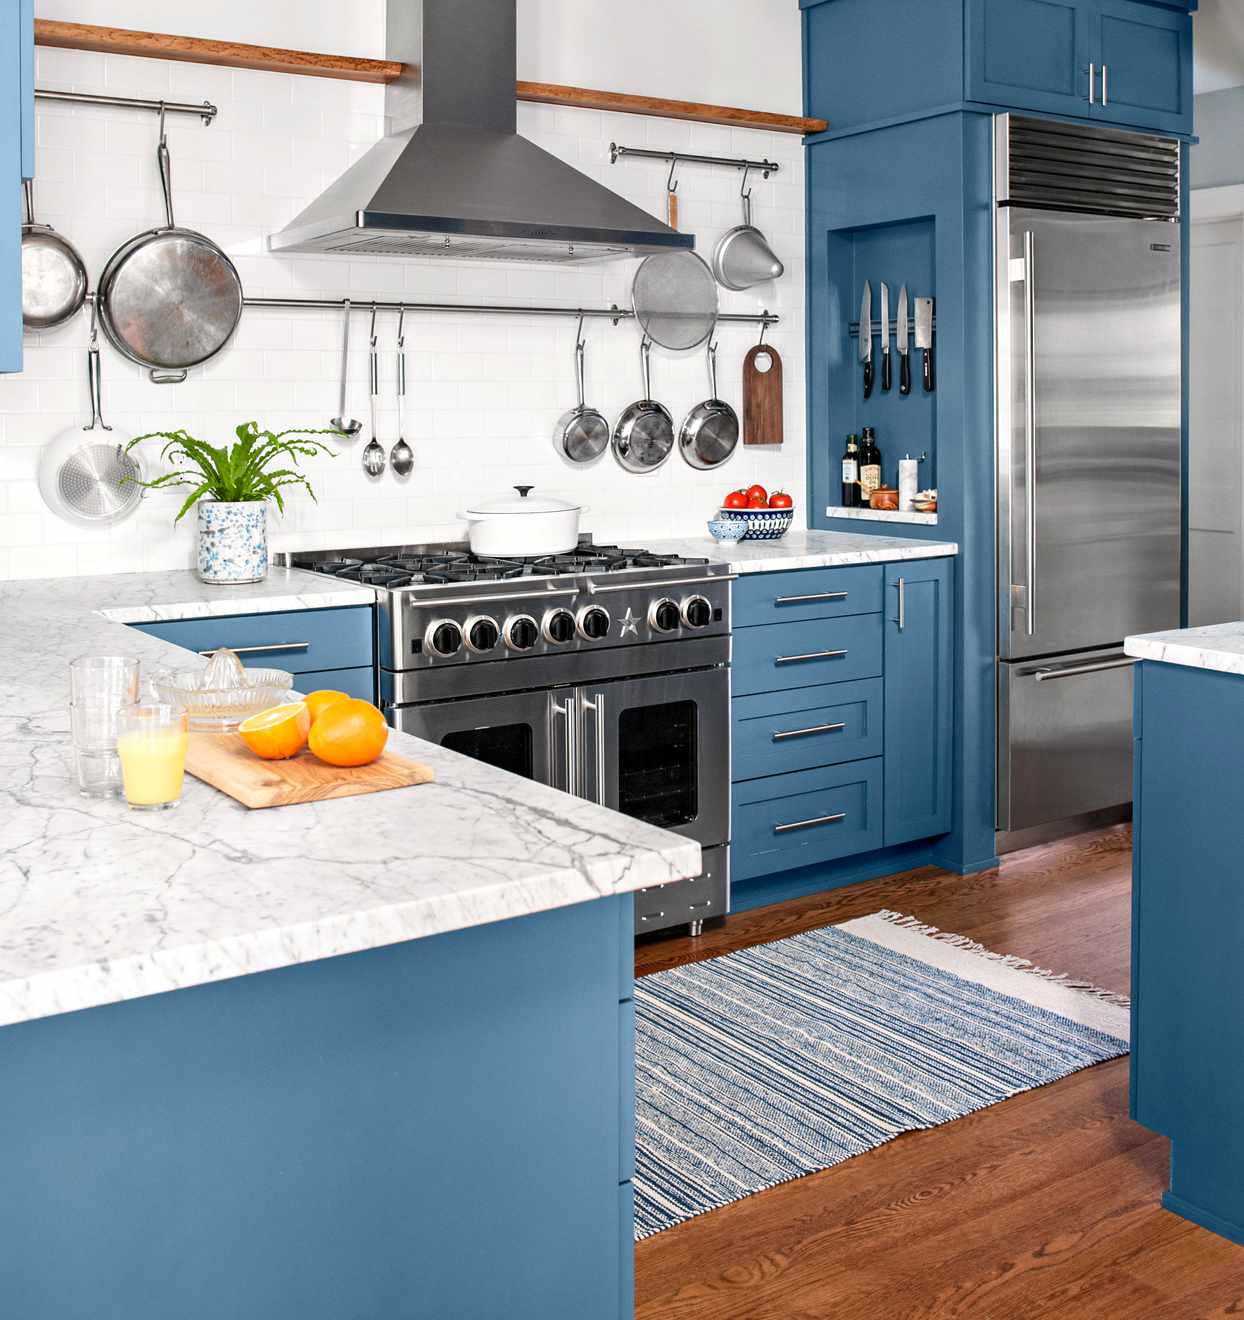 Timeless Kitchen Trends That Are Here to Stay   Better Homes & Gardens